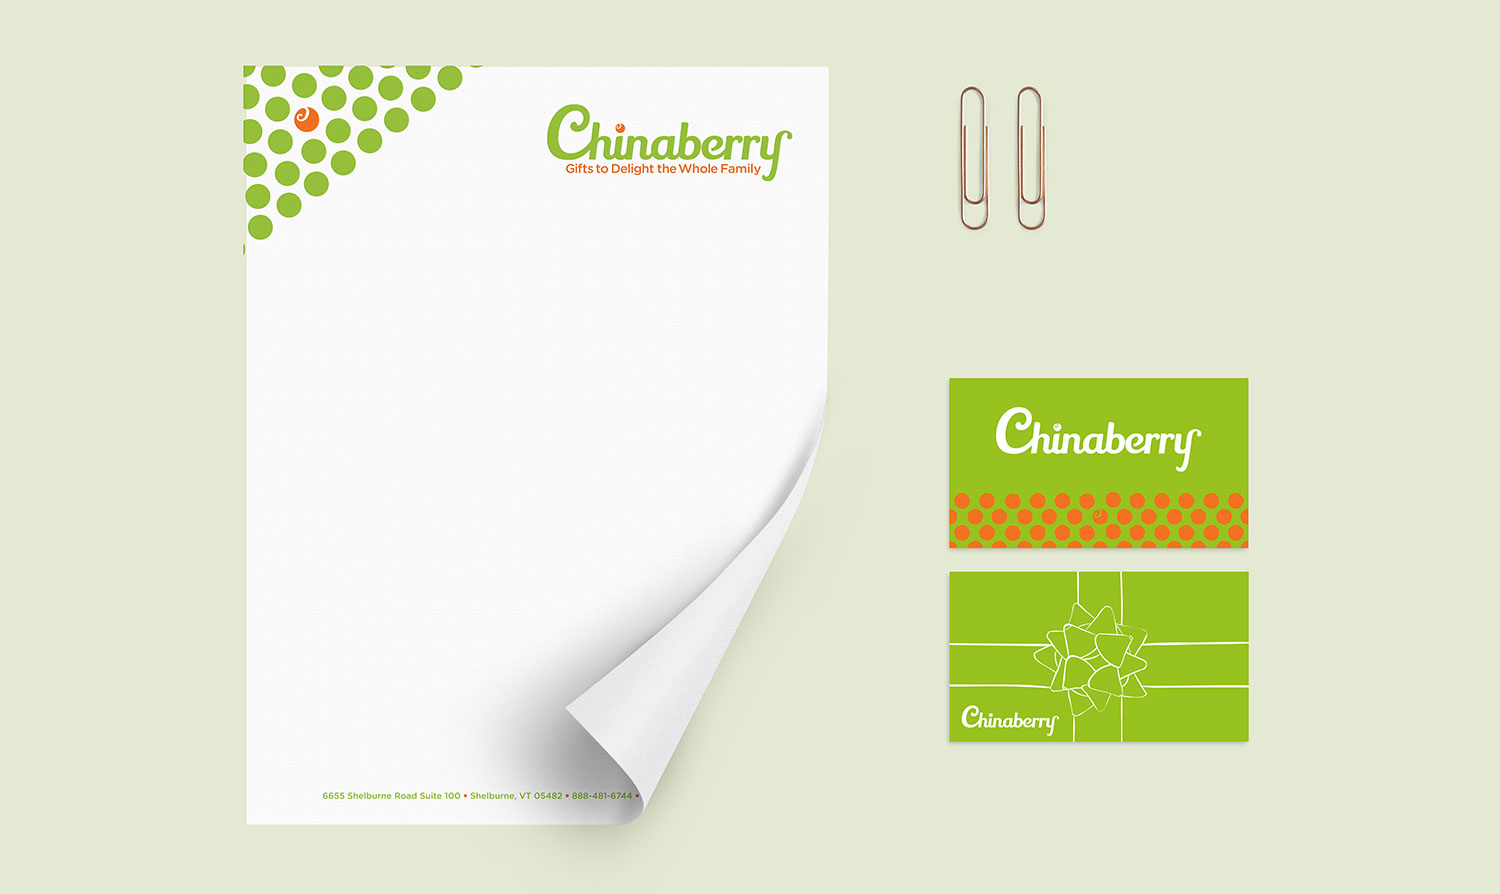 Chinaberry Brand Assets